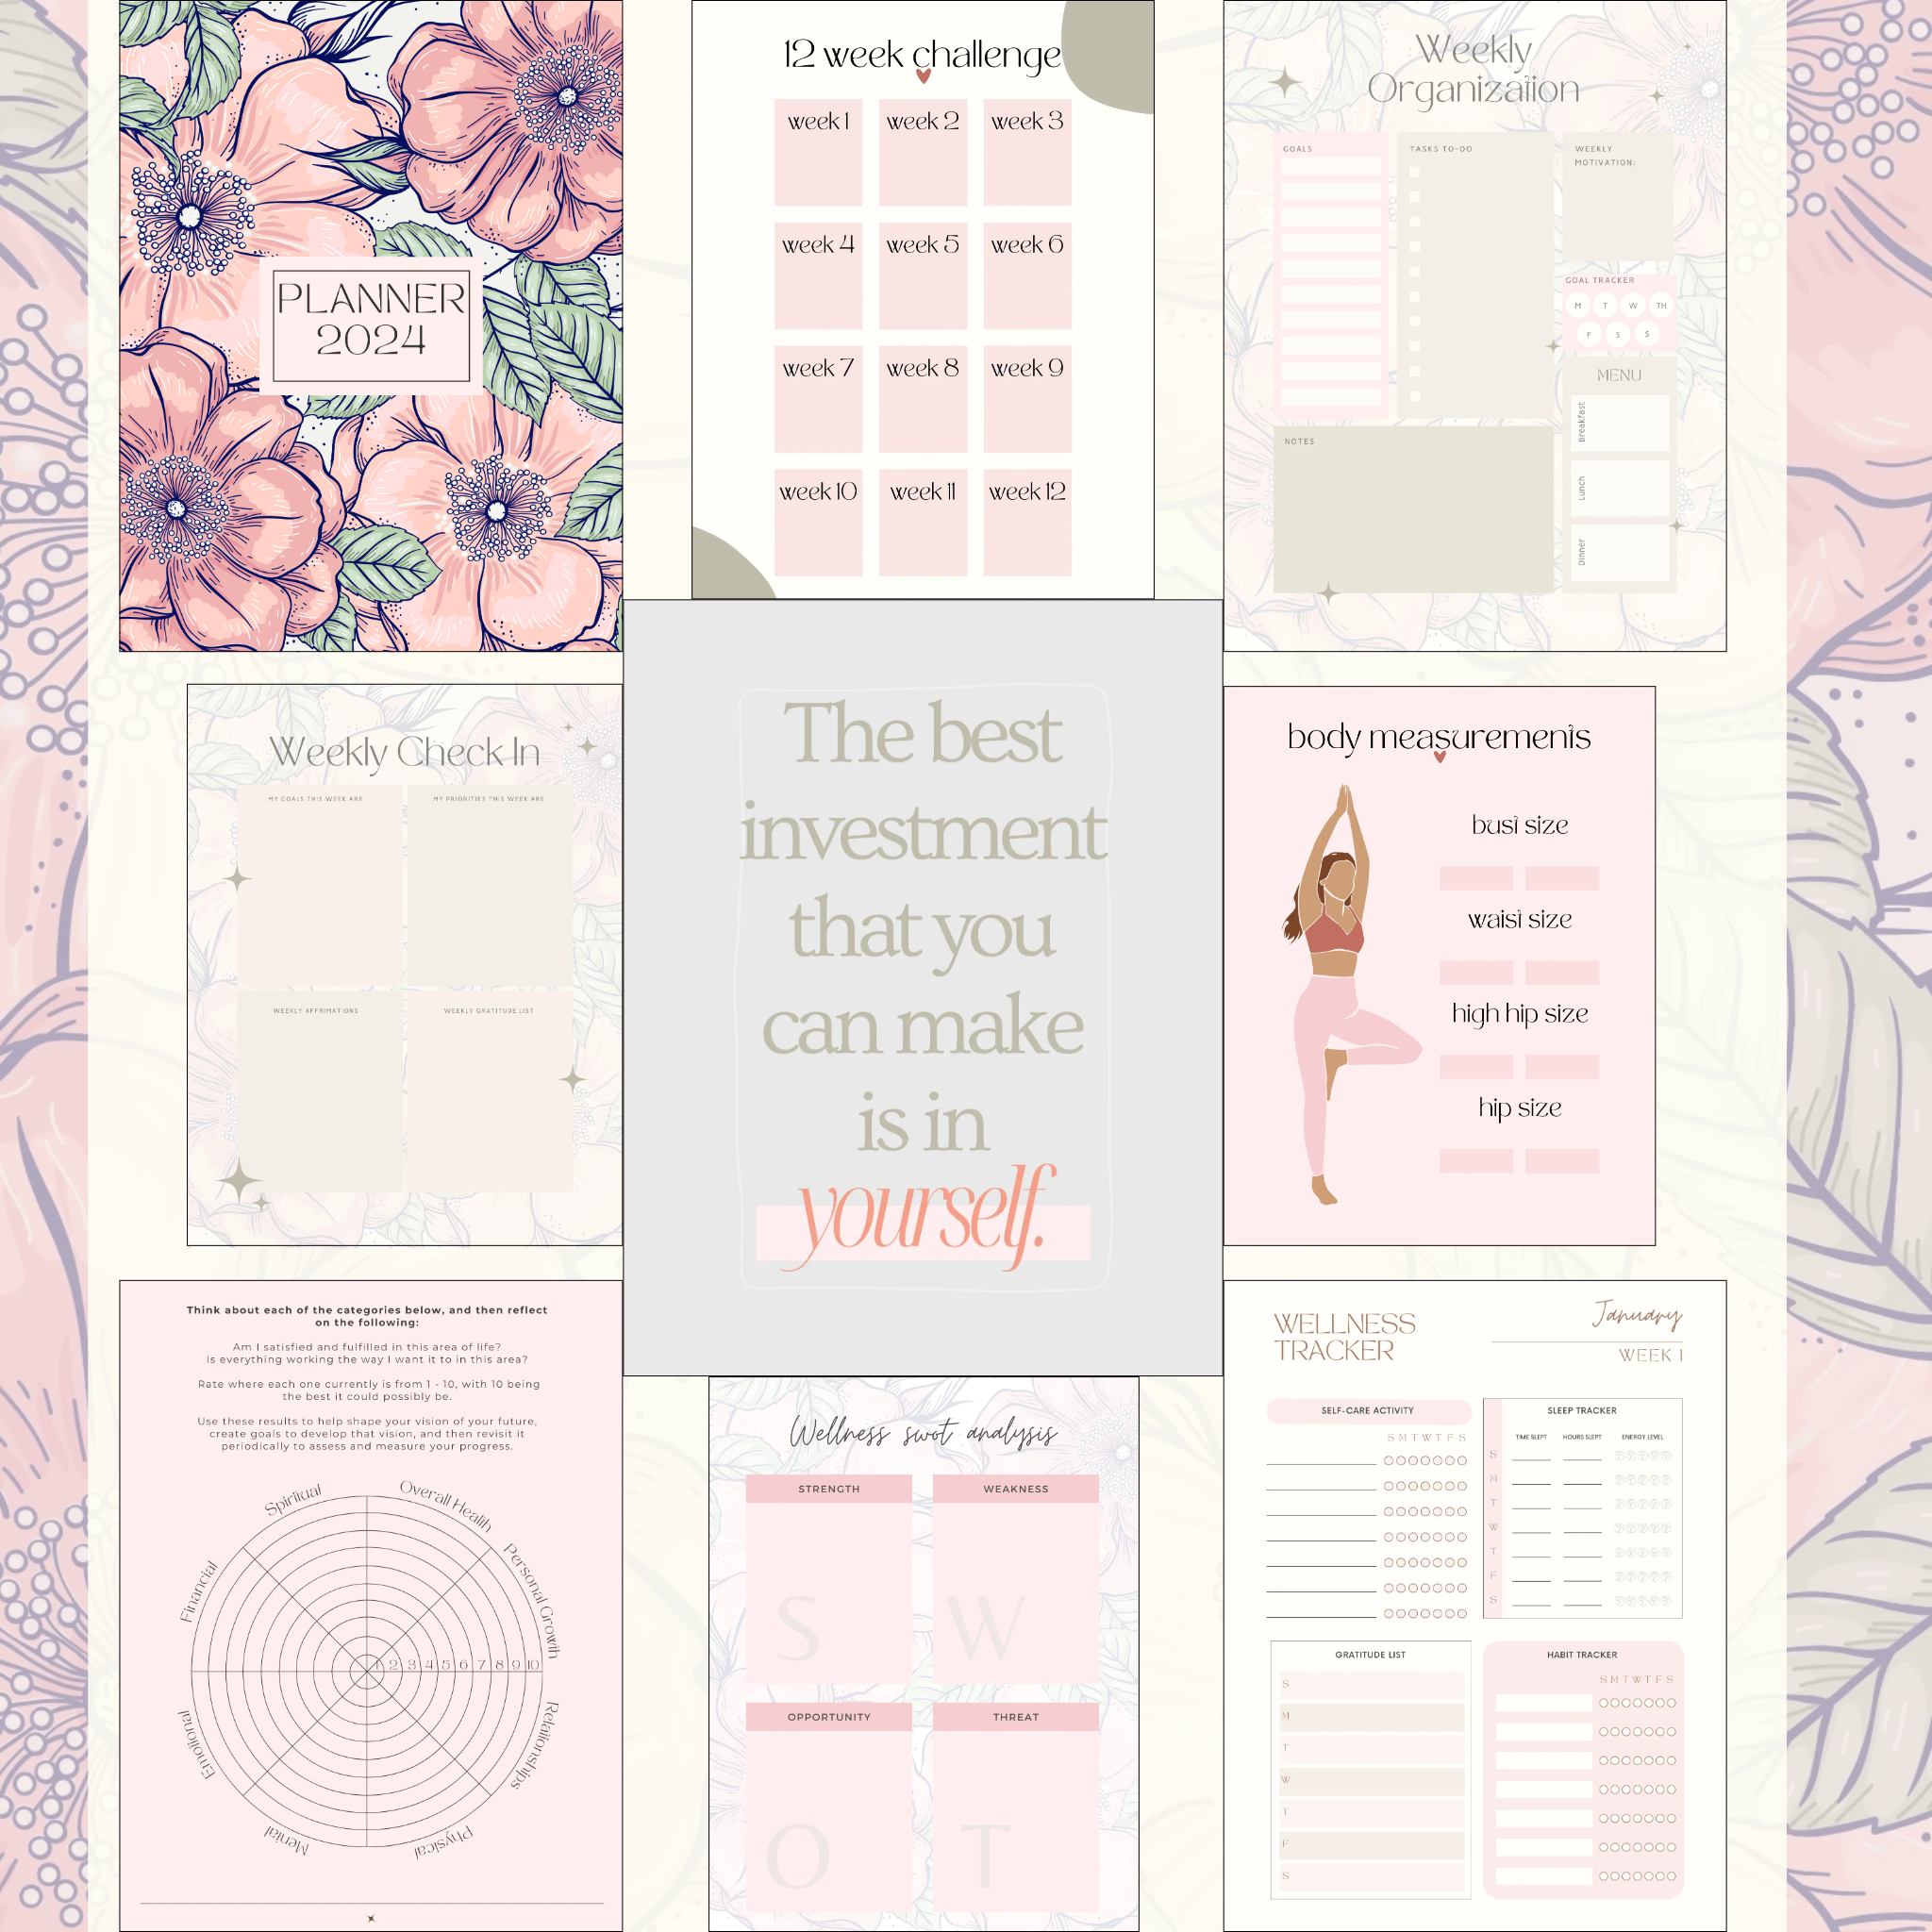 Planner images